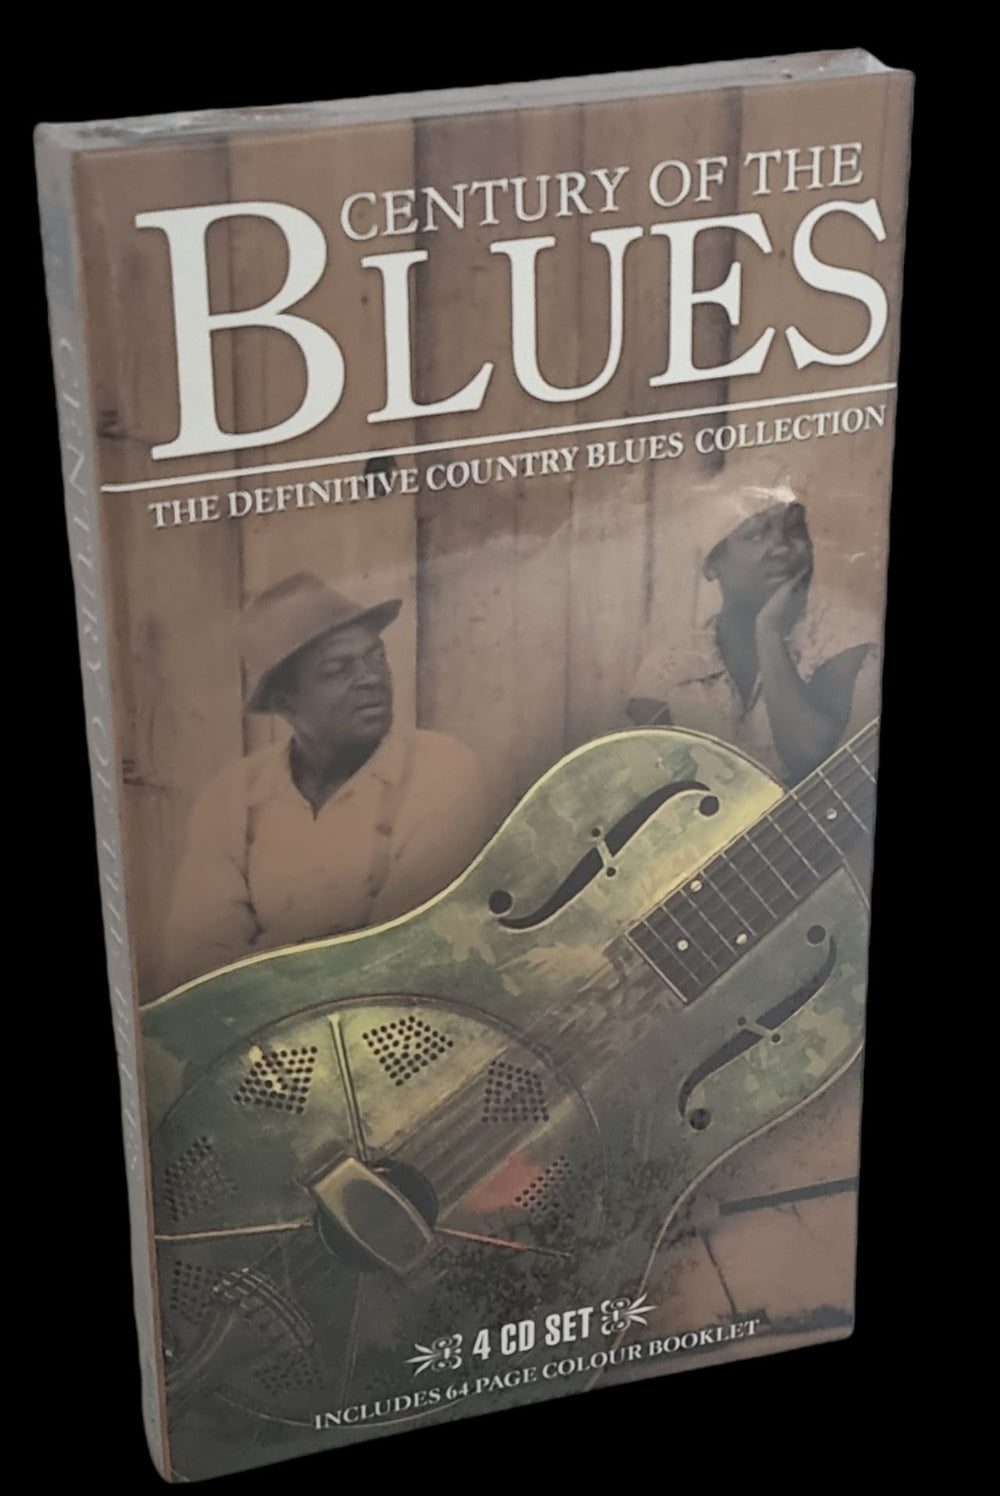 Various-Blues & Gospel Century Of The Blues - The Definitive Country Blues Collection - Sealed UK CD Album Box Set CDCD5003